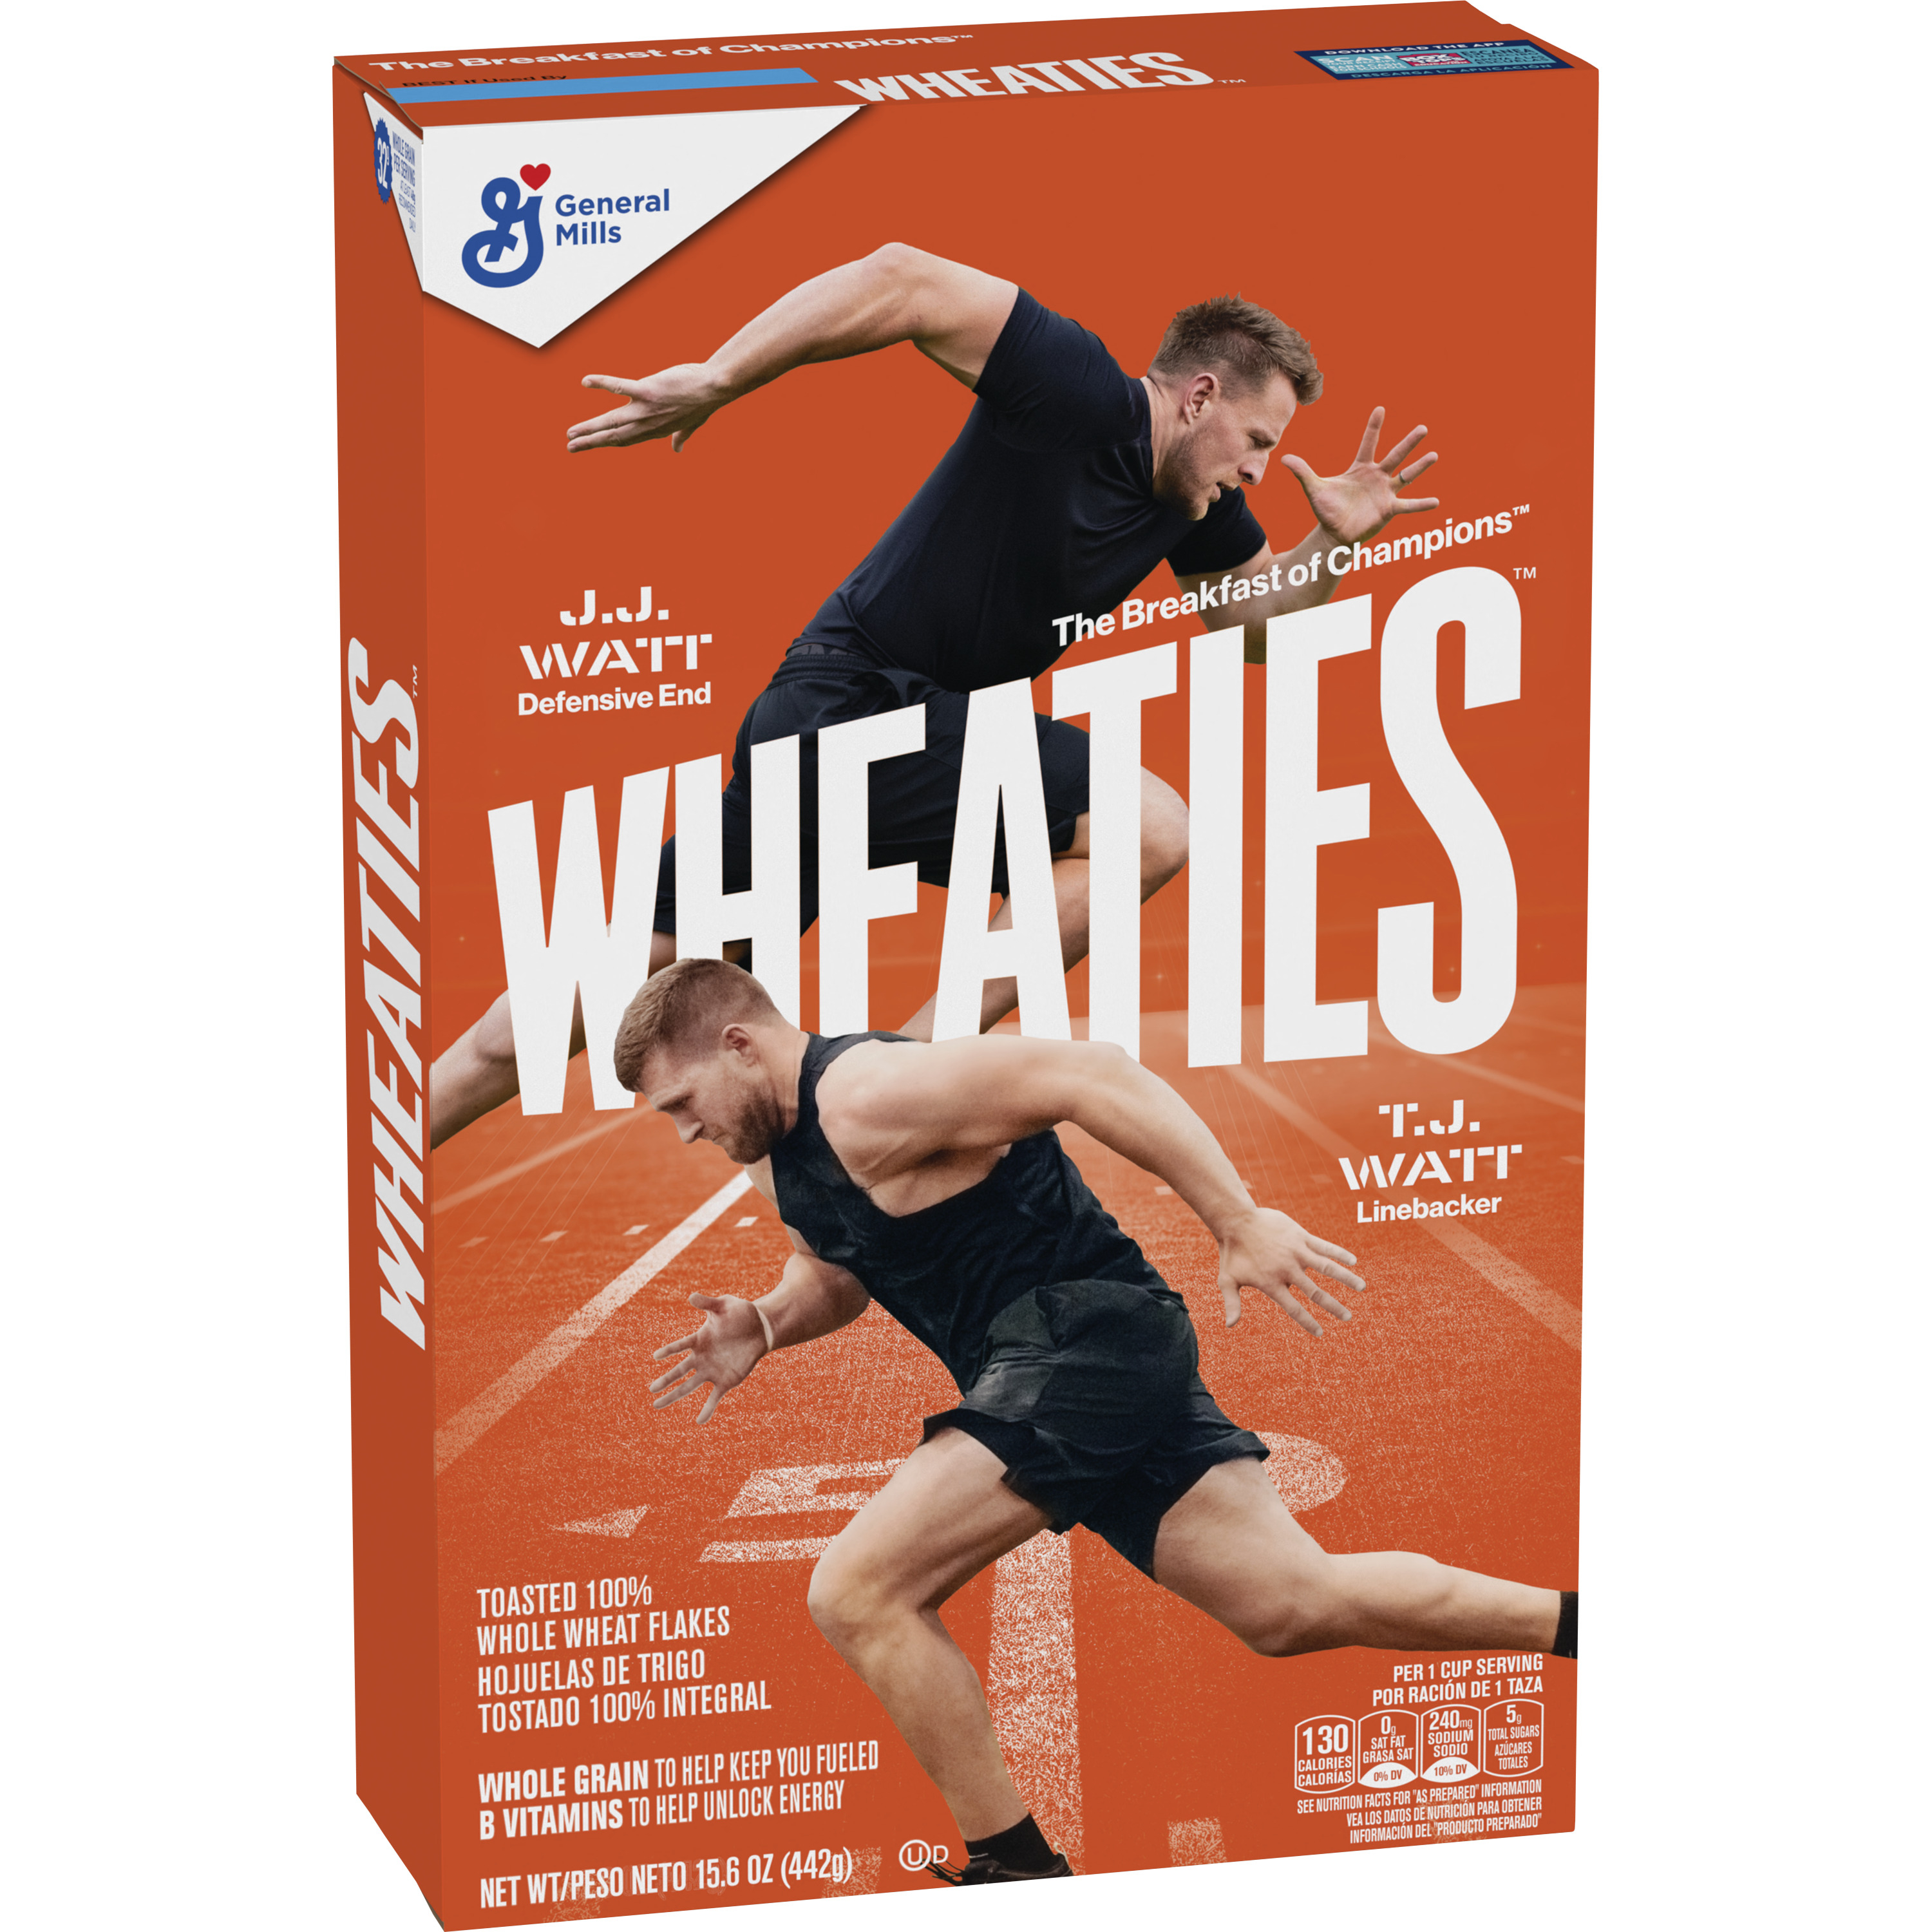 T.J. and J.J. Watt make history as the first brothers to share the cover of  a Wheaties box 